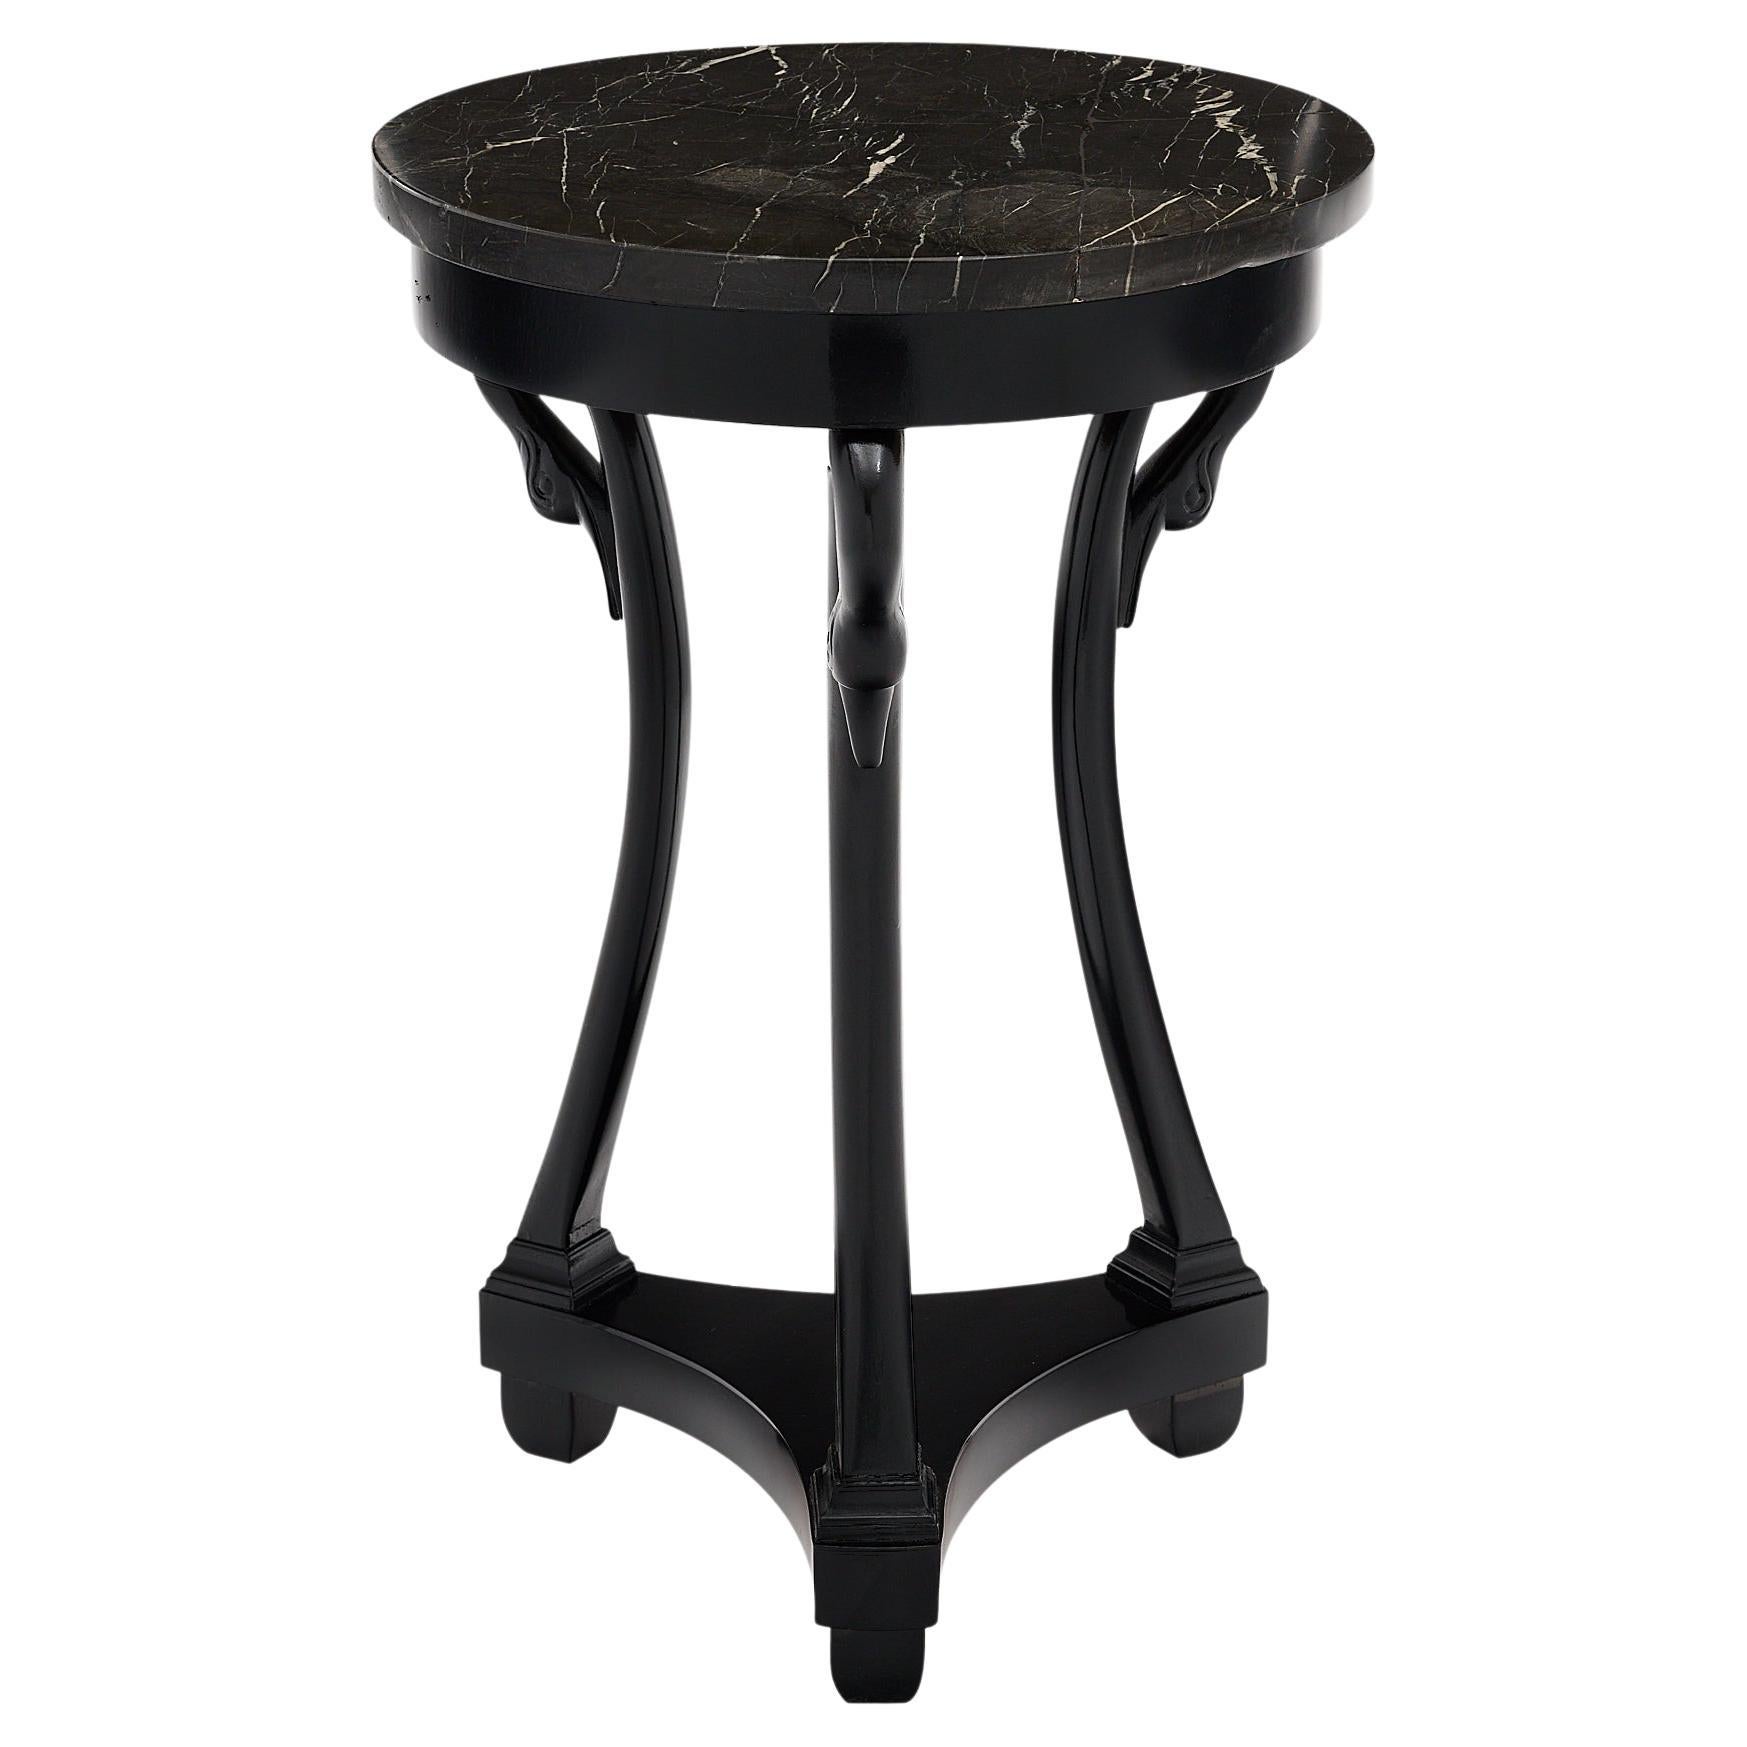 Empire Style Side Table